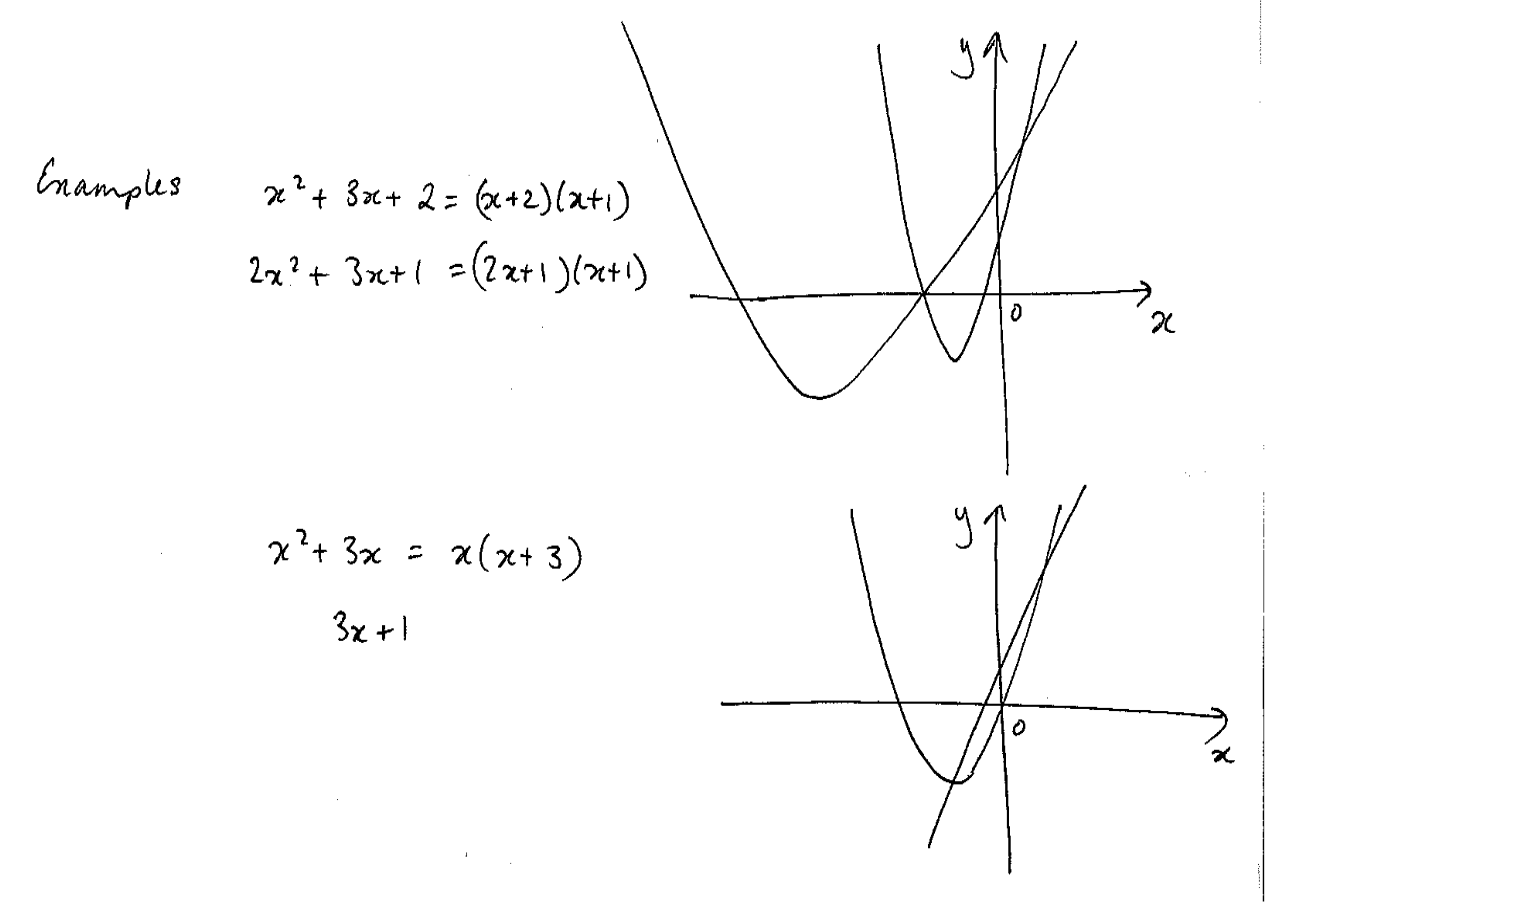 Two hand-drawn sets of axis. The first has 2 parabolas drawn where they both cross the x-axis at two points but the seocnd had a higher y-intercept and a steeper gradient. The second axis has a parabola and a straight line where the parabola crosses the x-axis twice and has a y-intercept of c=0 and the straight line has a positive gradient with a +c y-intercept